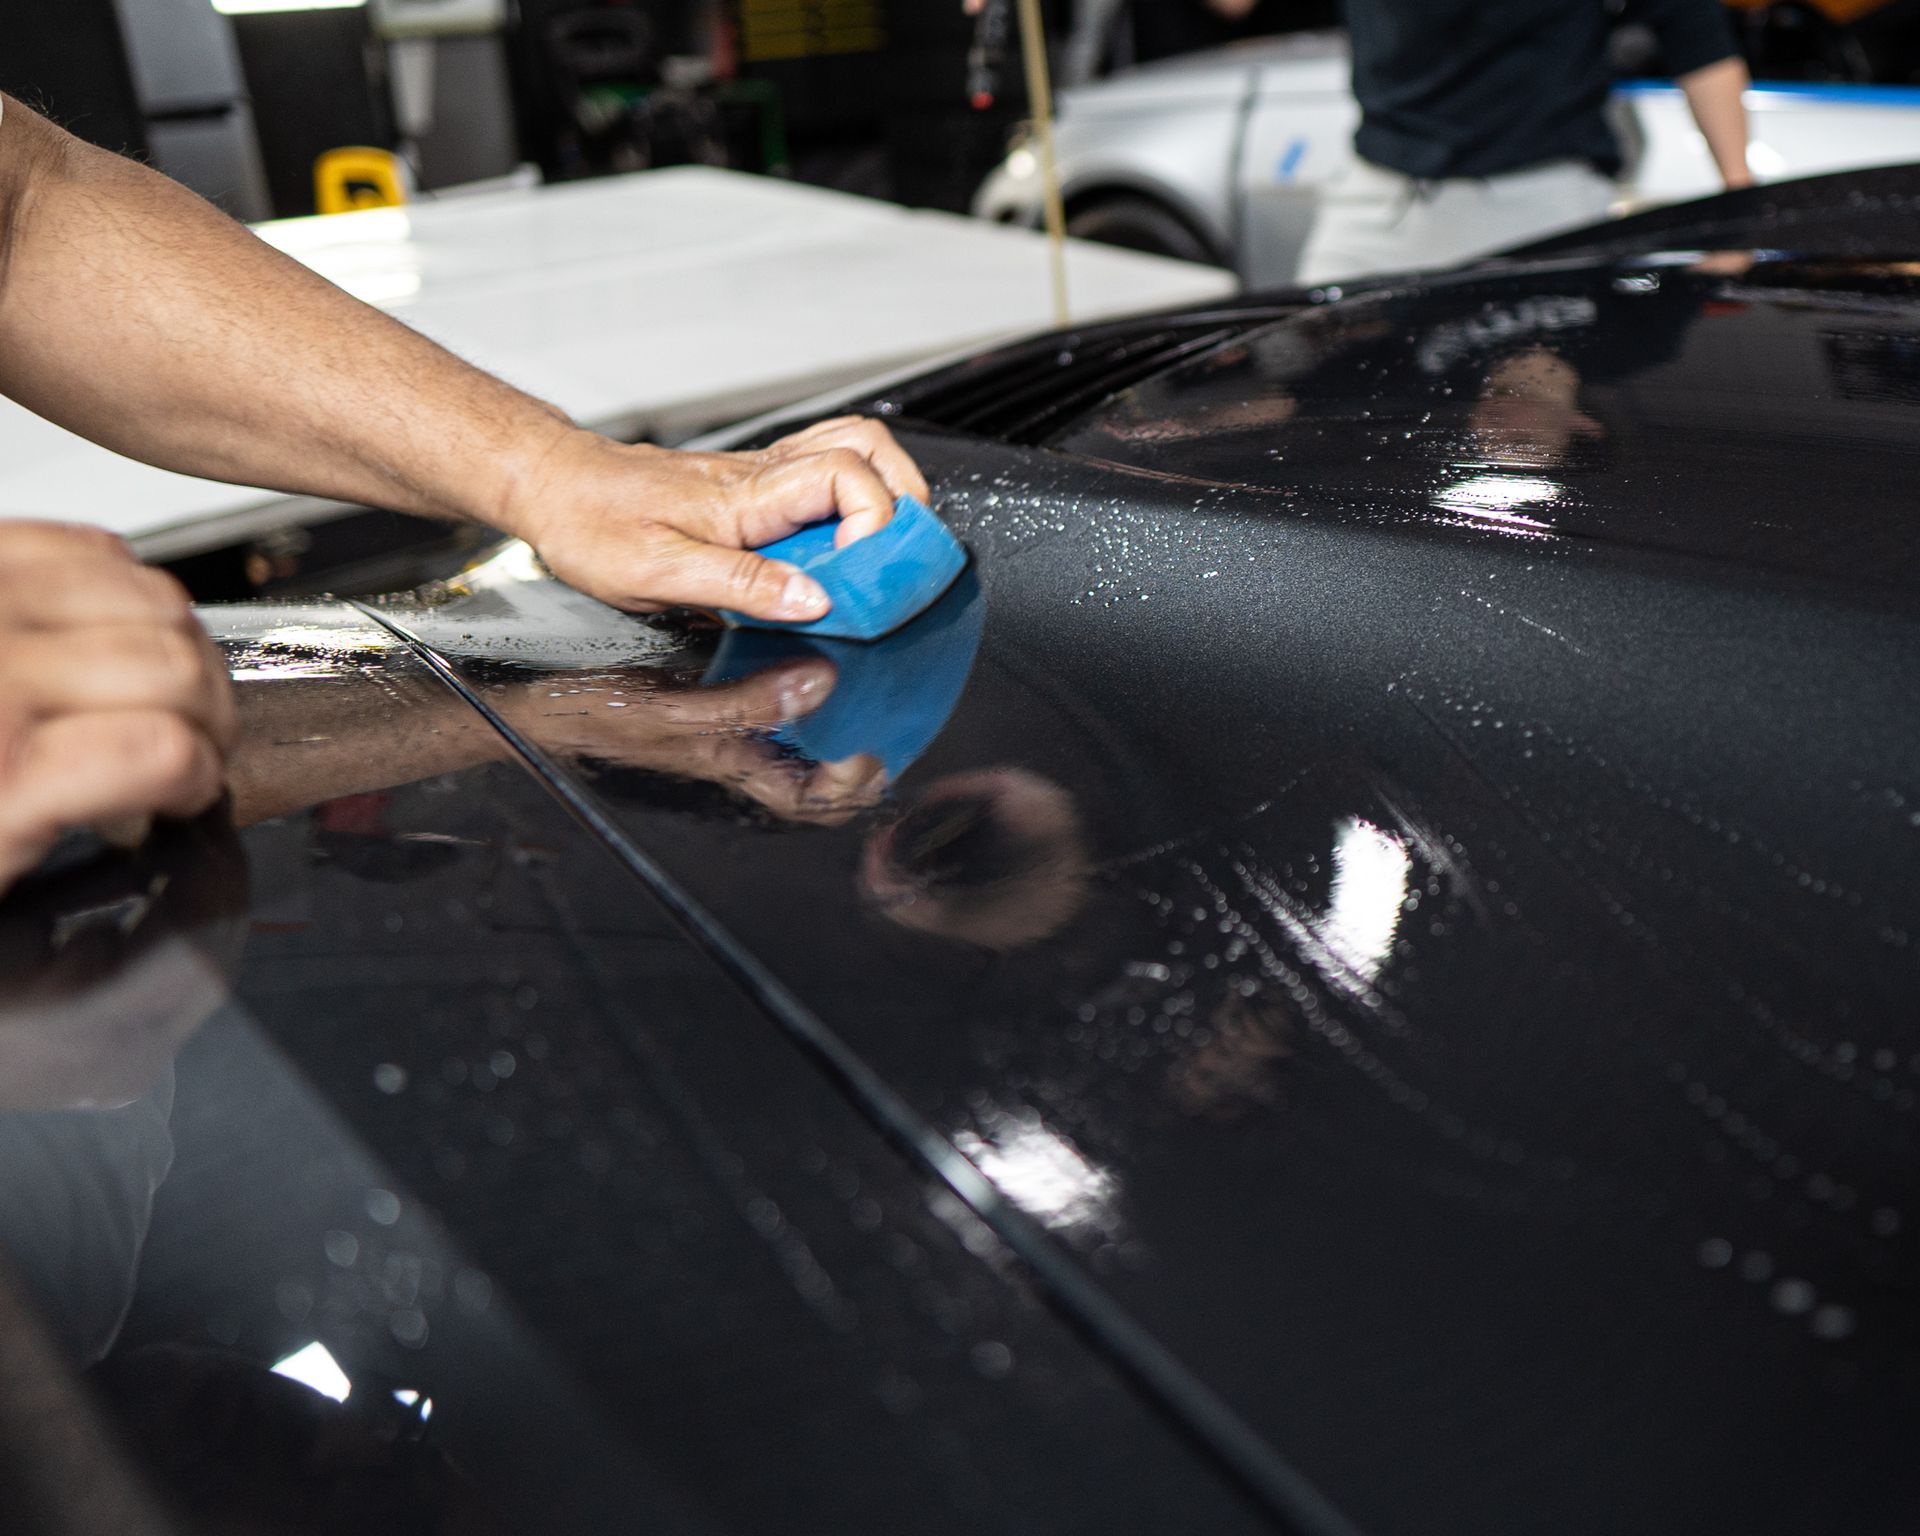 A person is cleaning the hood of a black car with a blue sponge.